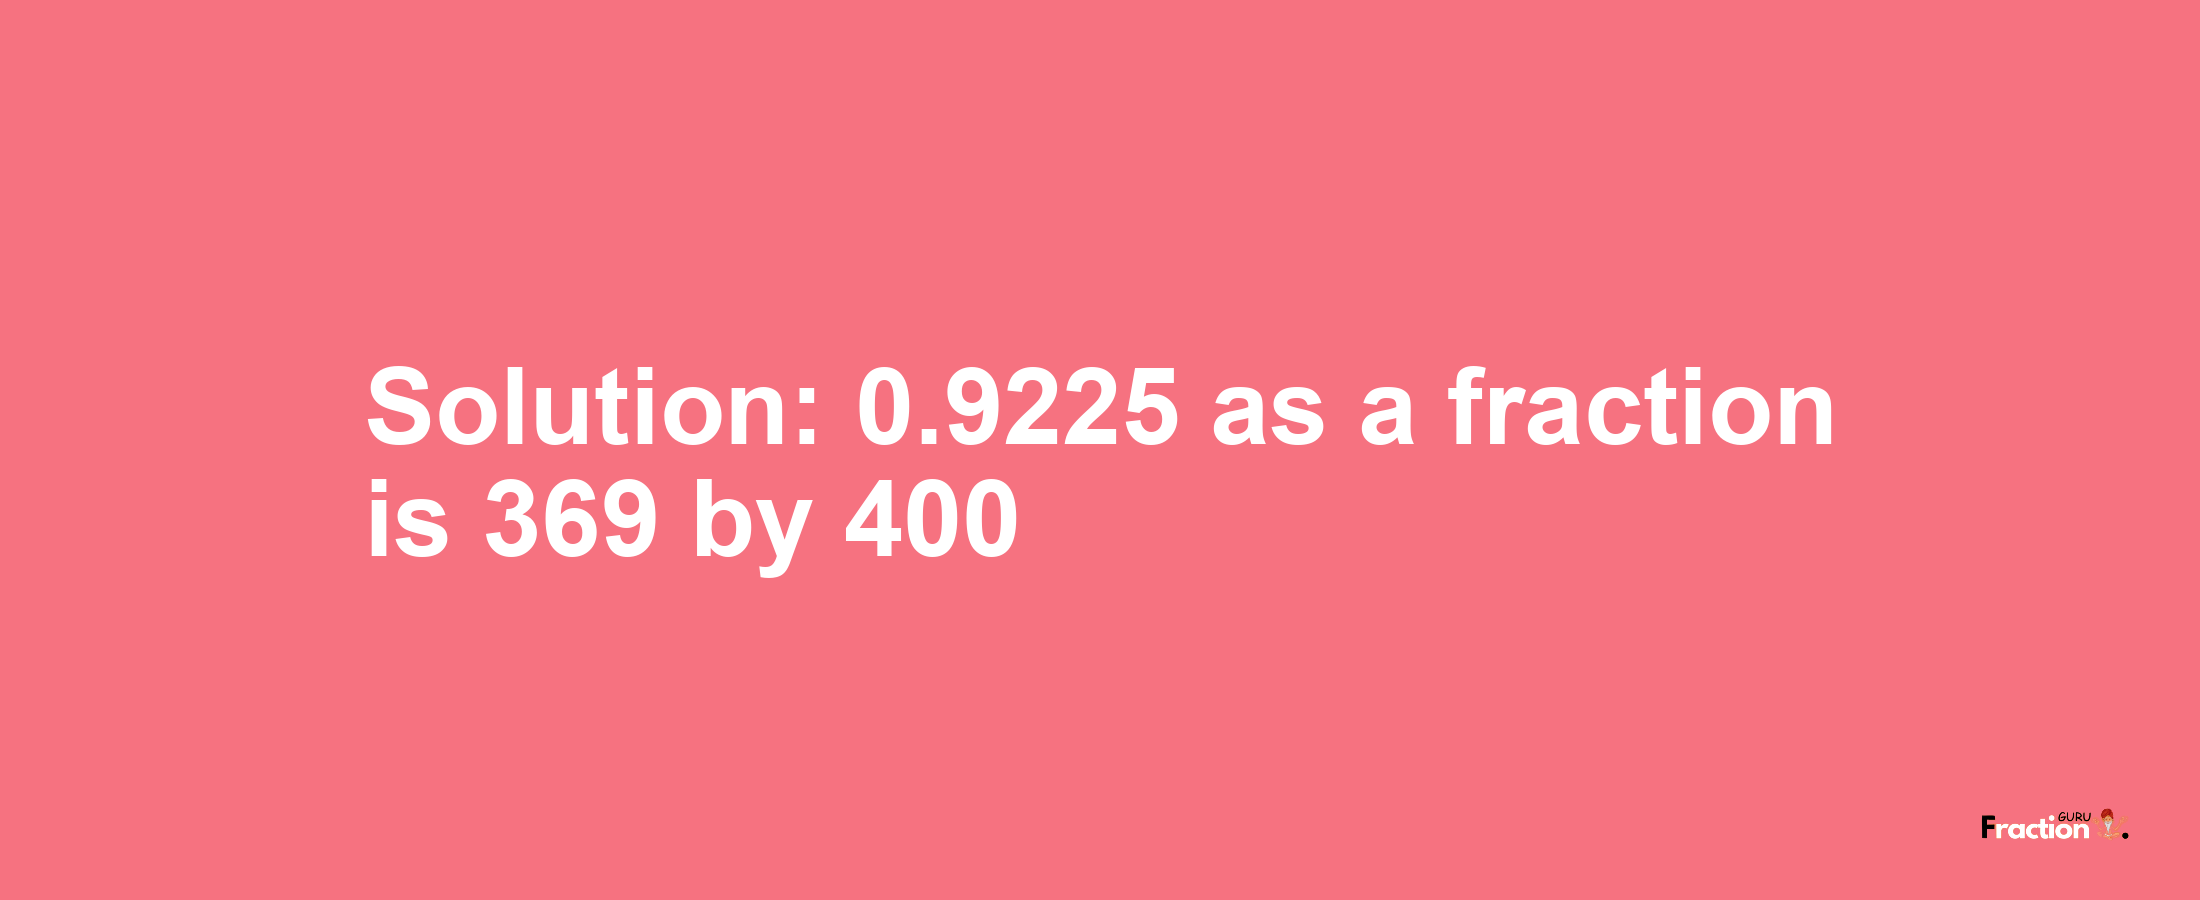 Solution:0.9225 as a fraction is 369/400